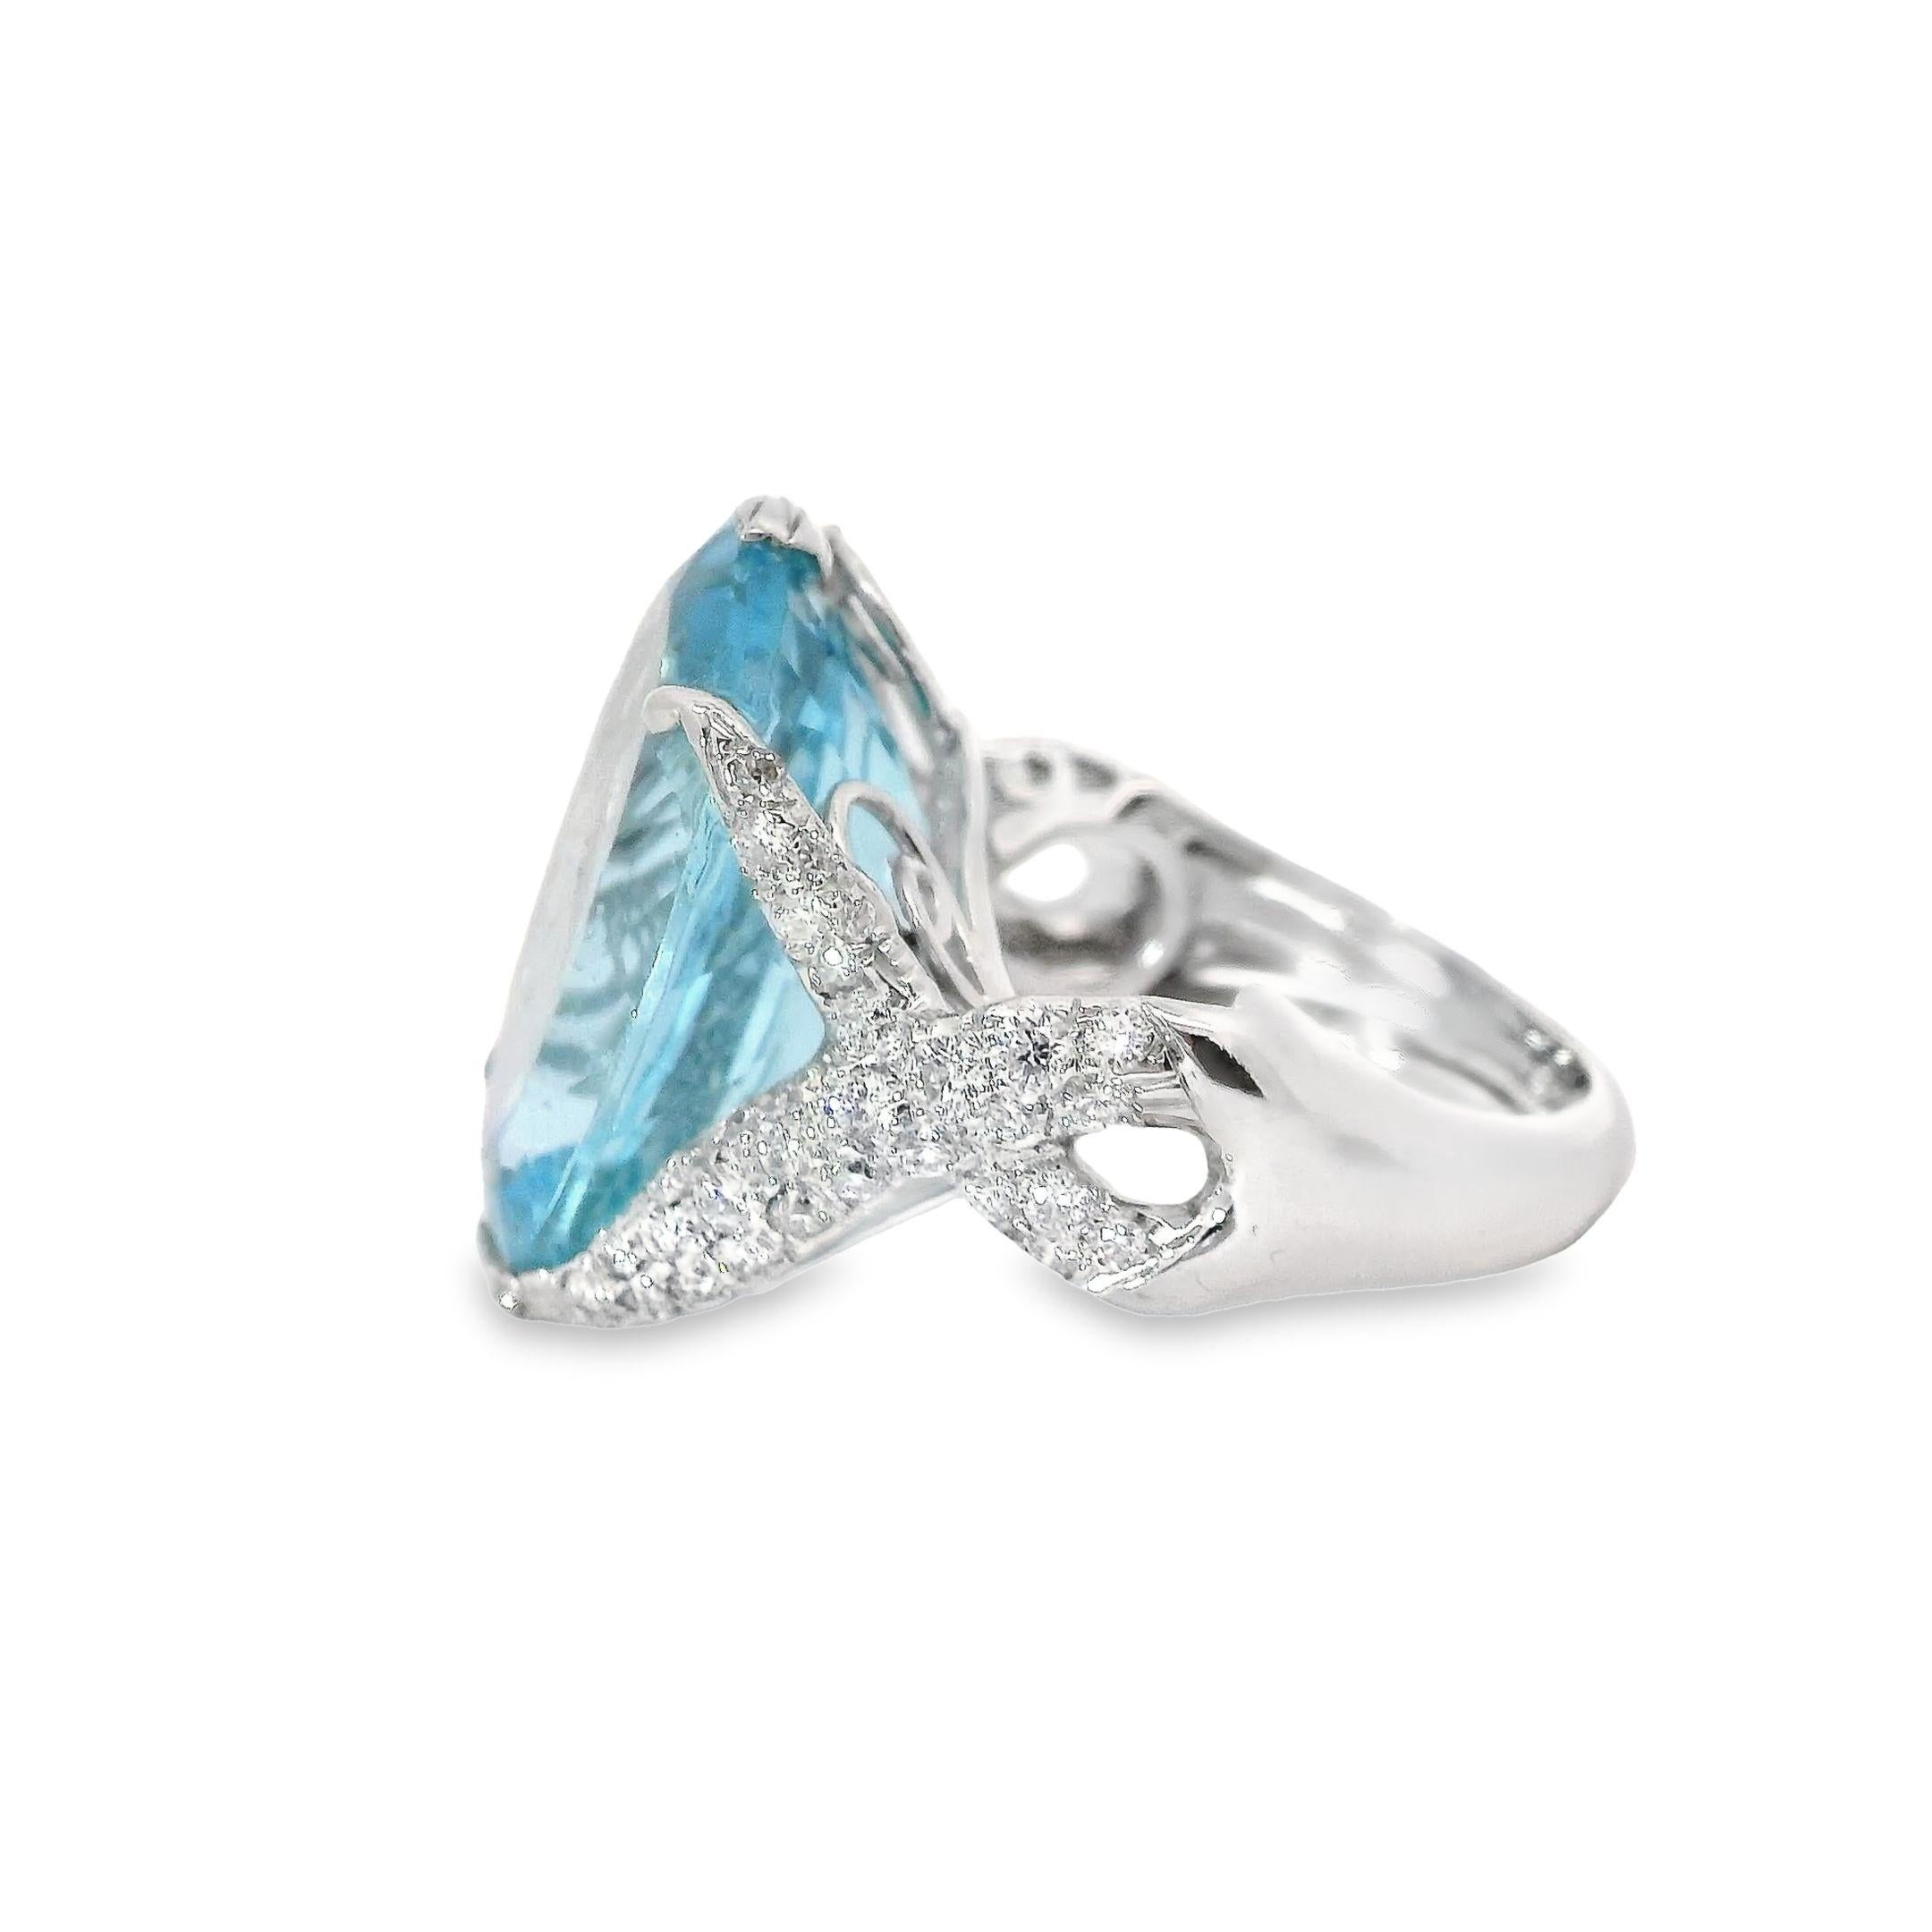 Dive into the depths of elegance with our stunning Blue Topaz Ring. Crafted with meticulous attention to detail, this exquisite piece features a breathtaking 19.94 carat oval blue Topaz that sparkles with the same enchanting beauty as the tranquil